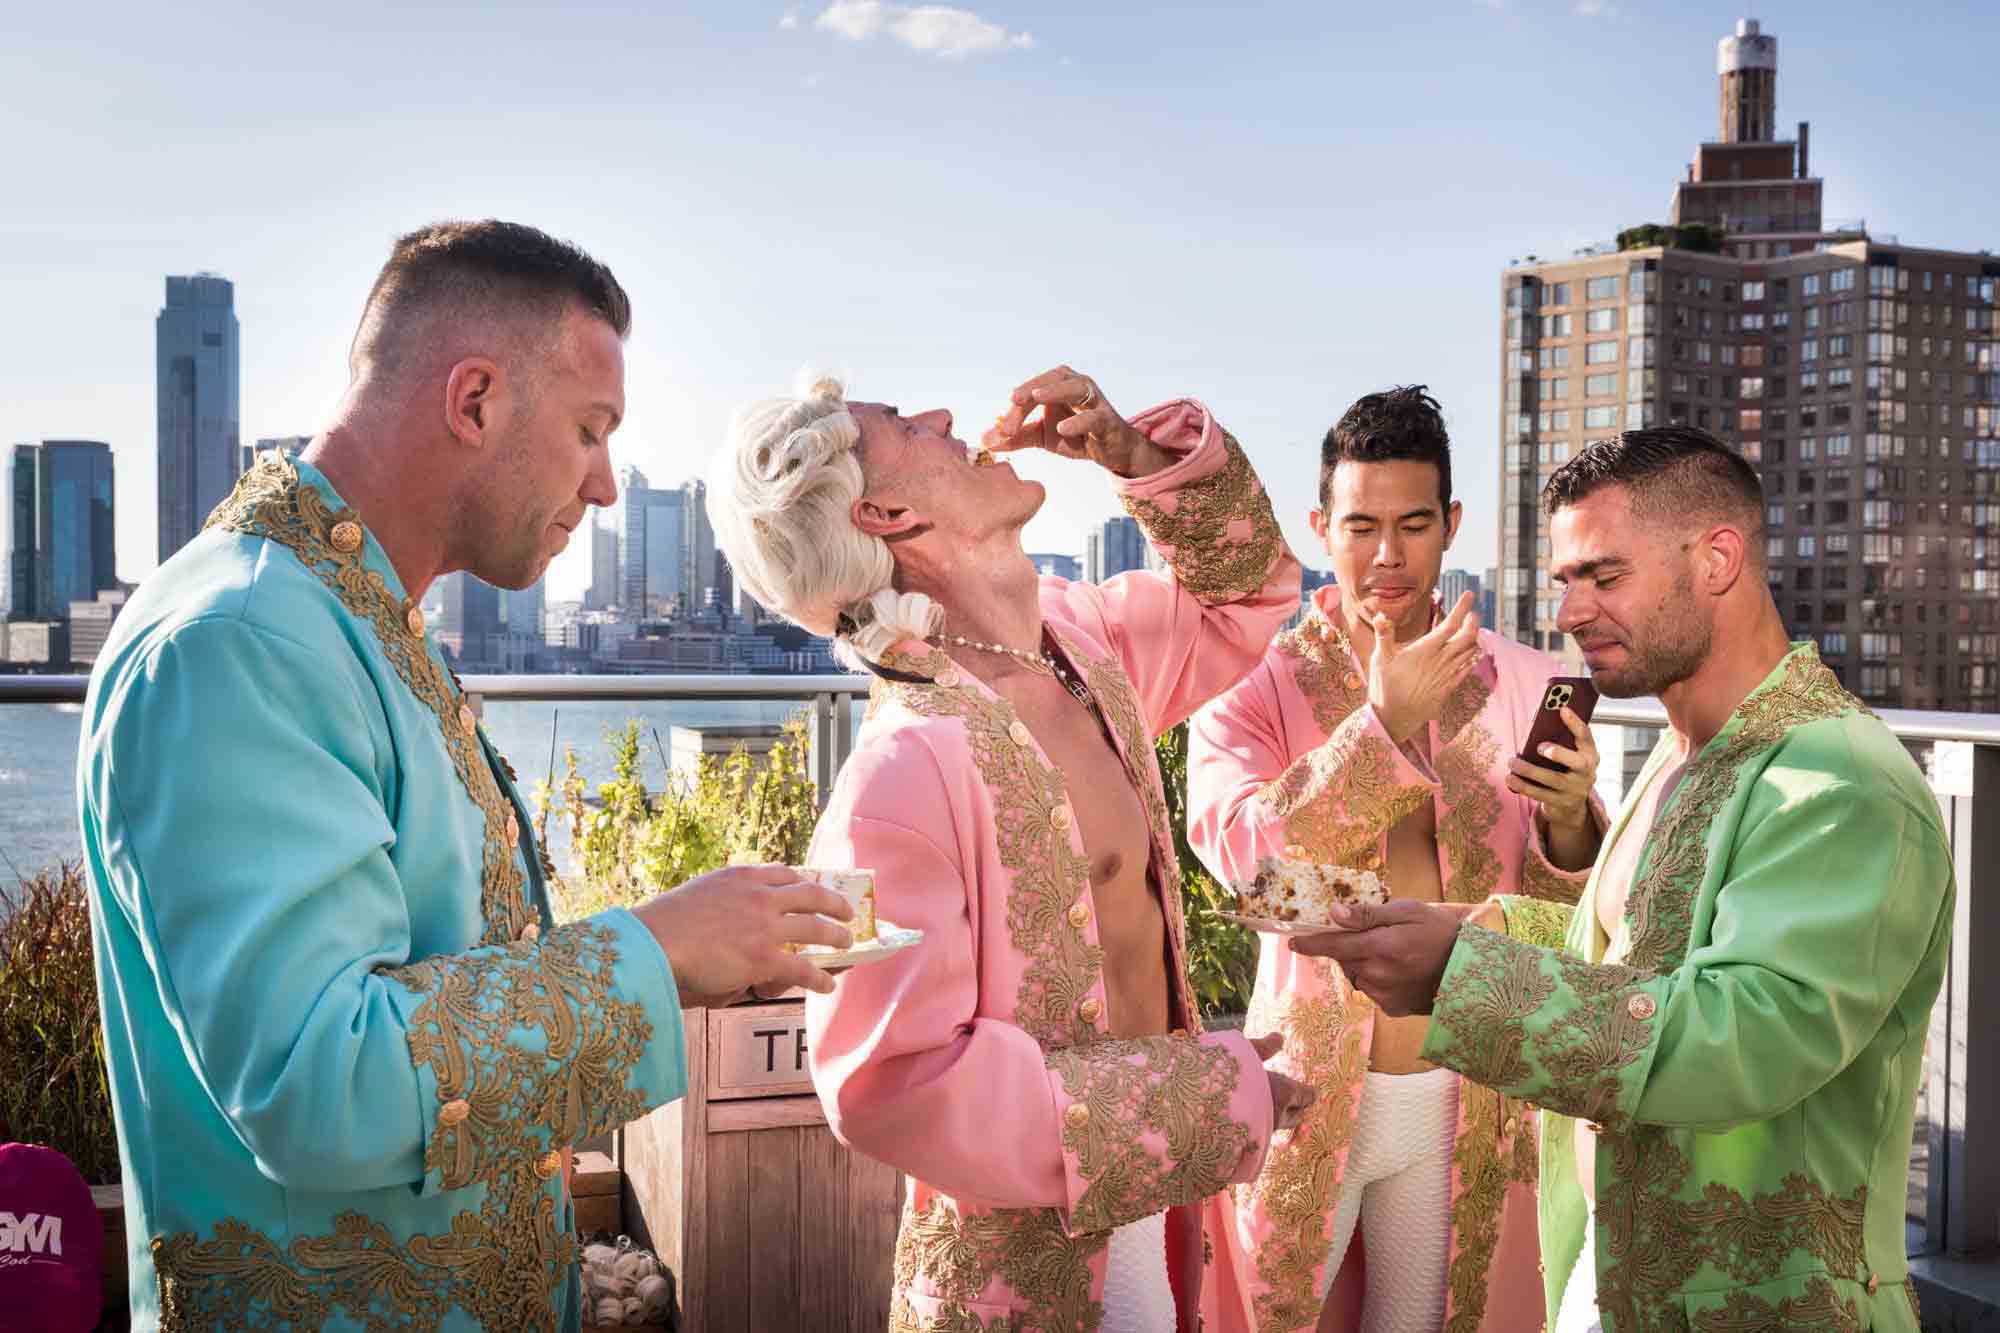 Men dressed as French courtiers eating cake with NYC waterfront in background